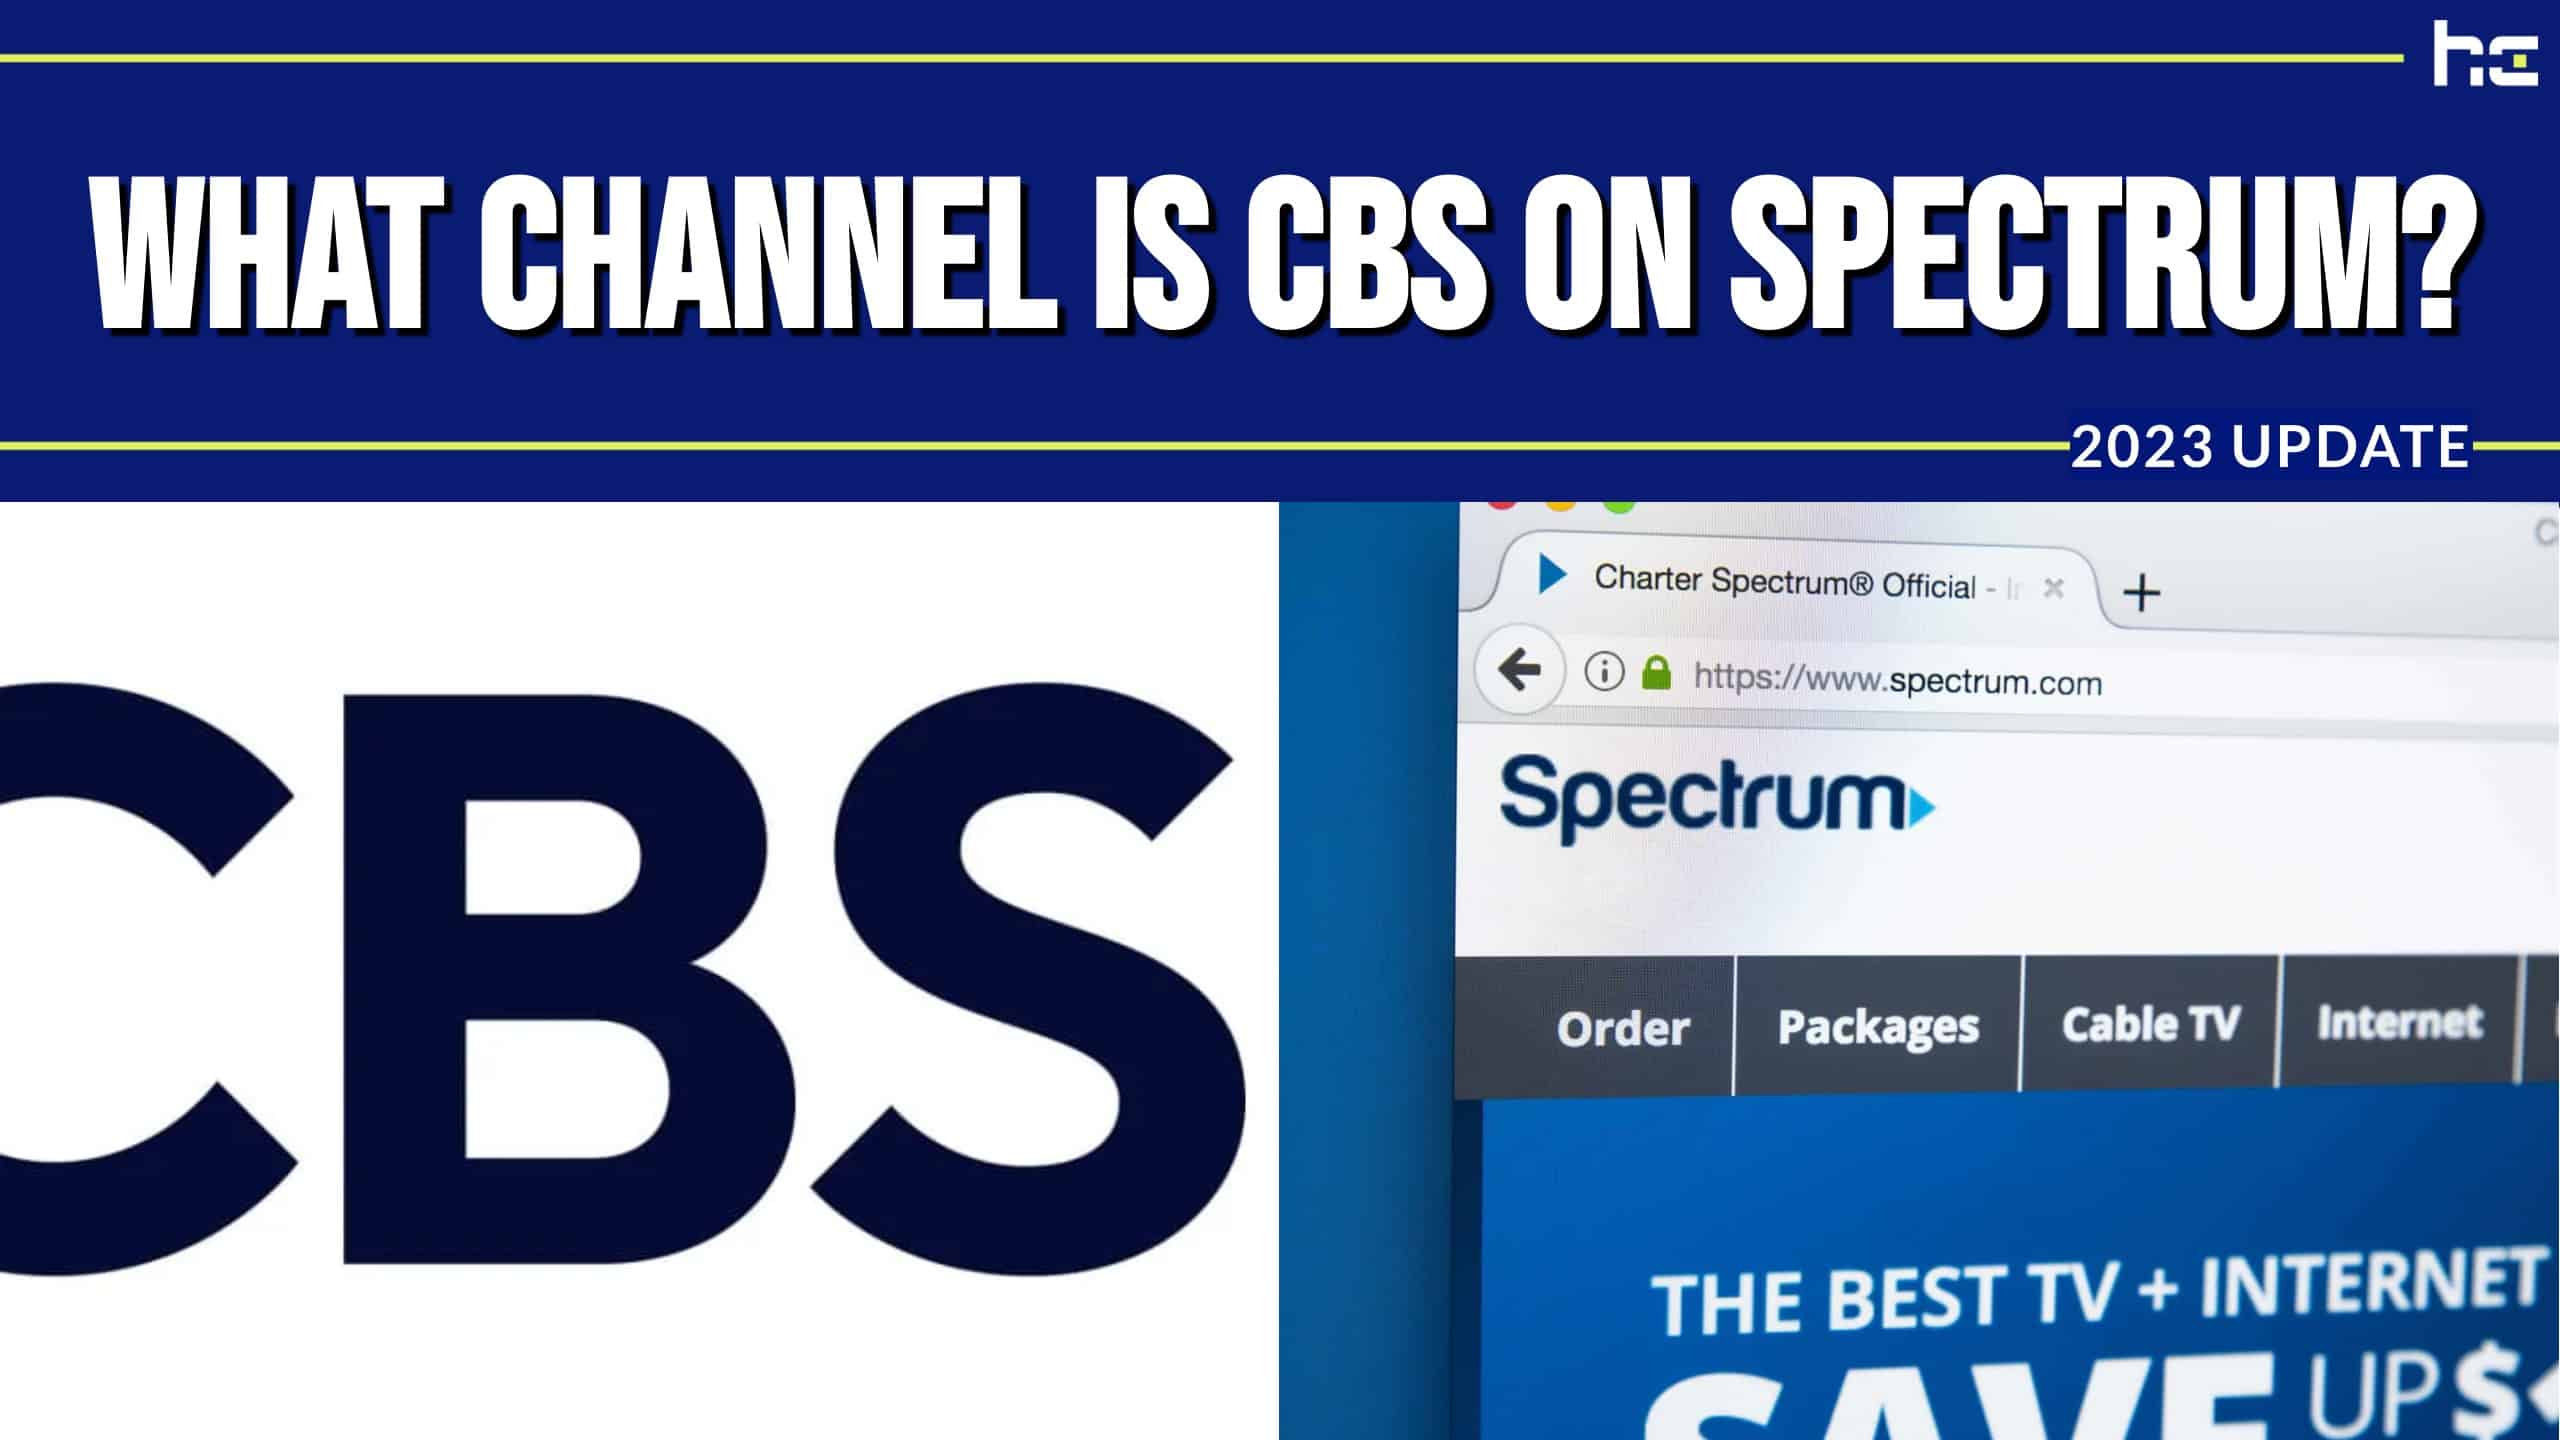 What Channel Is CBS on Spectrum?